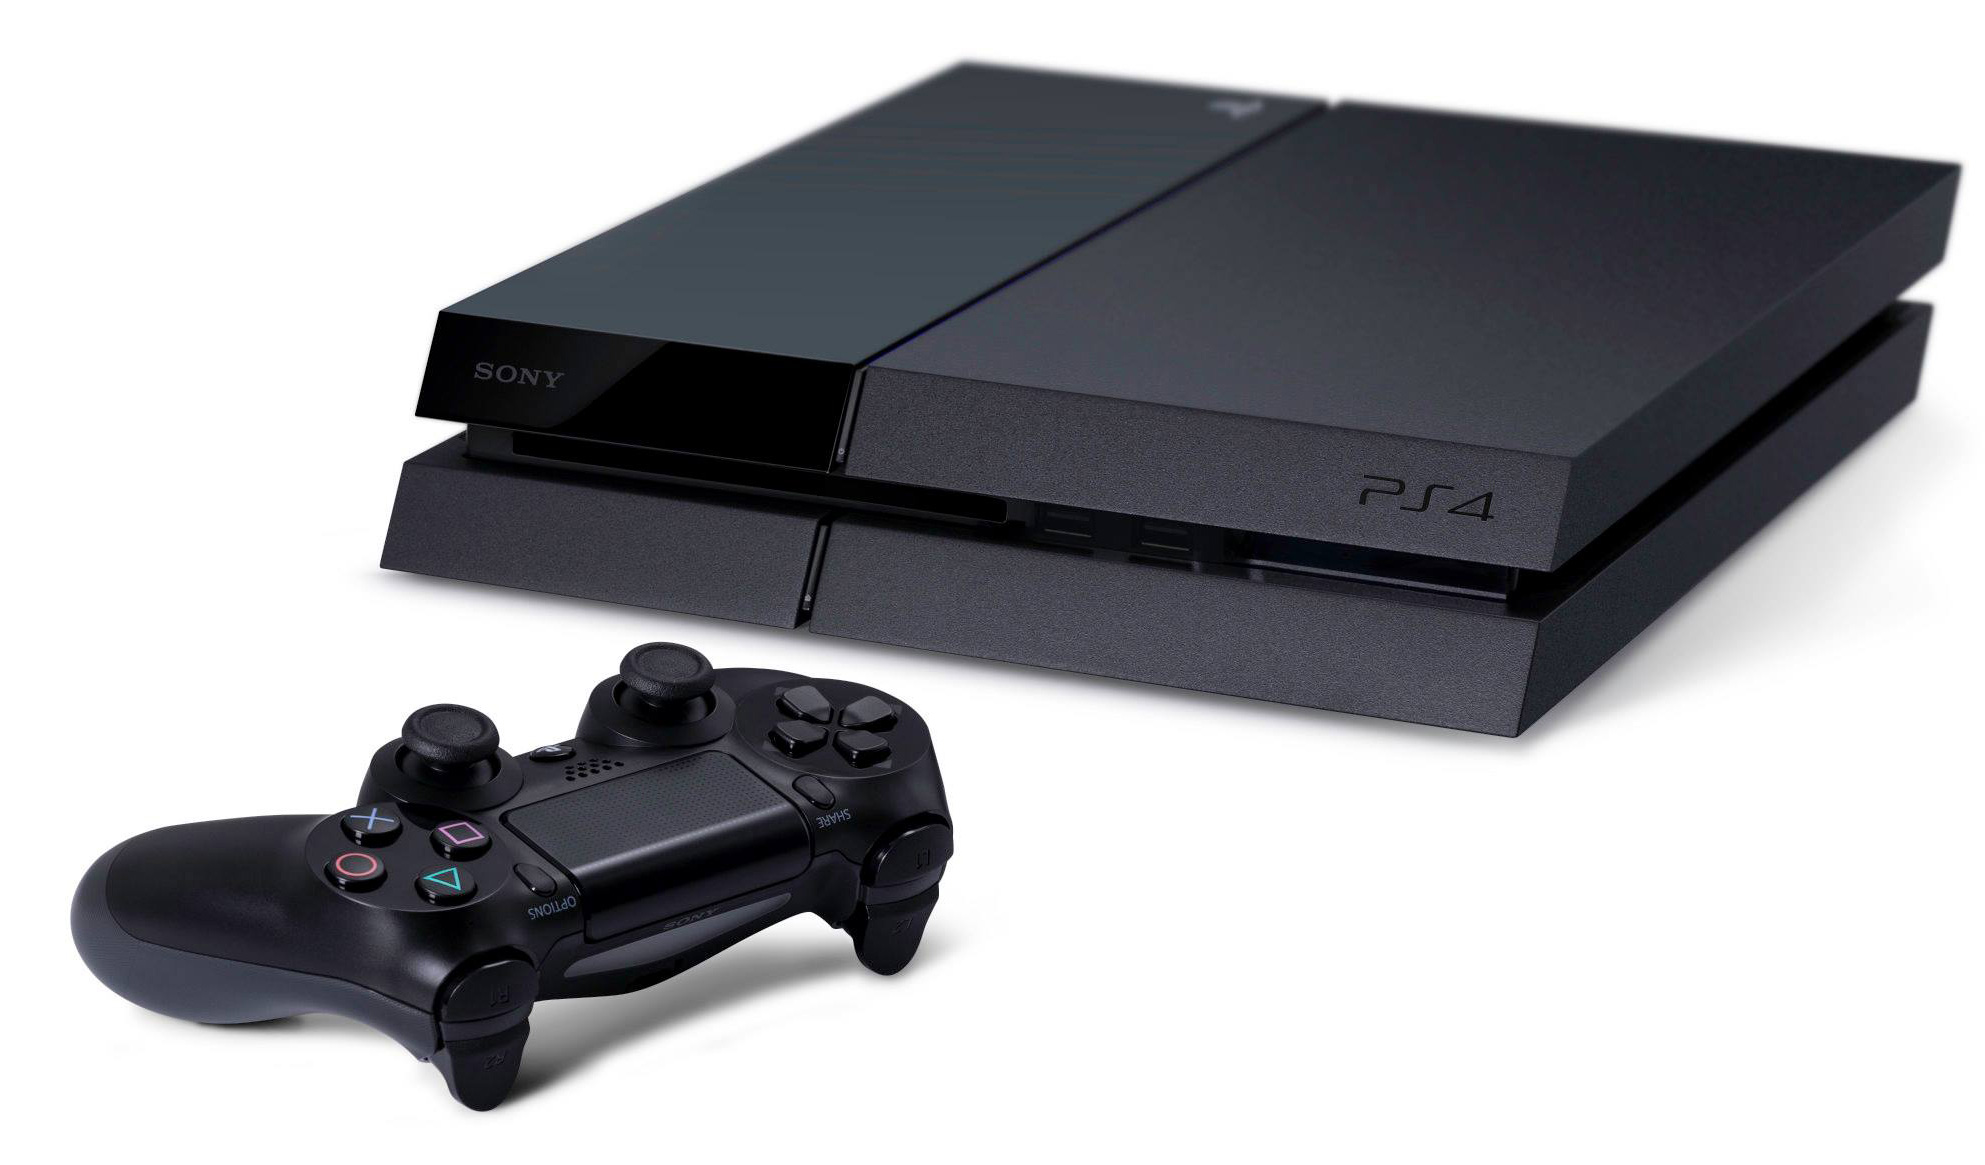 PS4 Heat Issues? Not Likely - PS4 Approved for FCC Registration